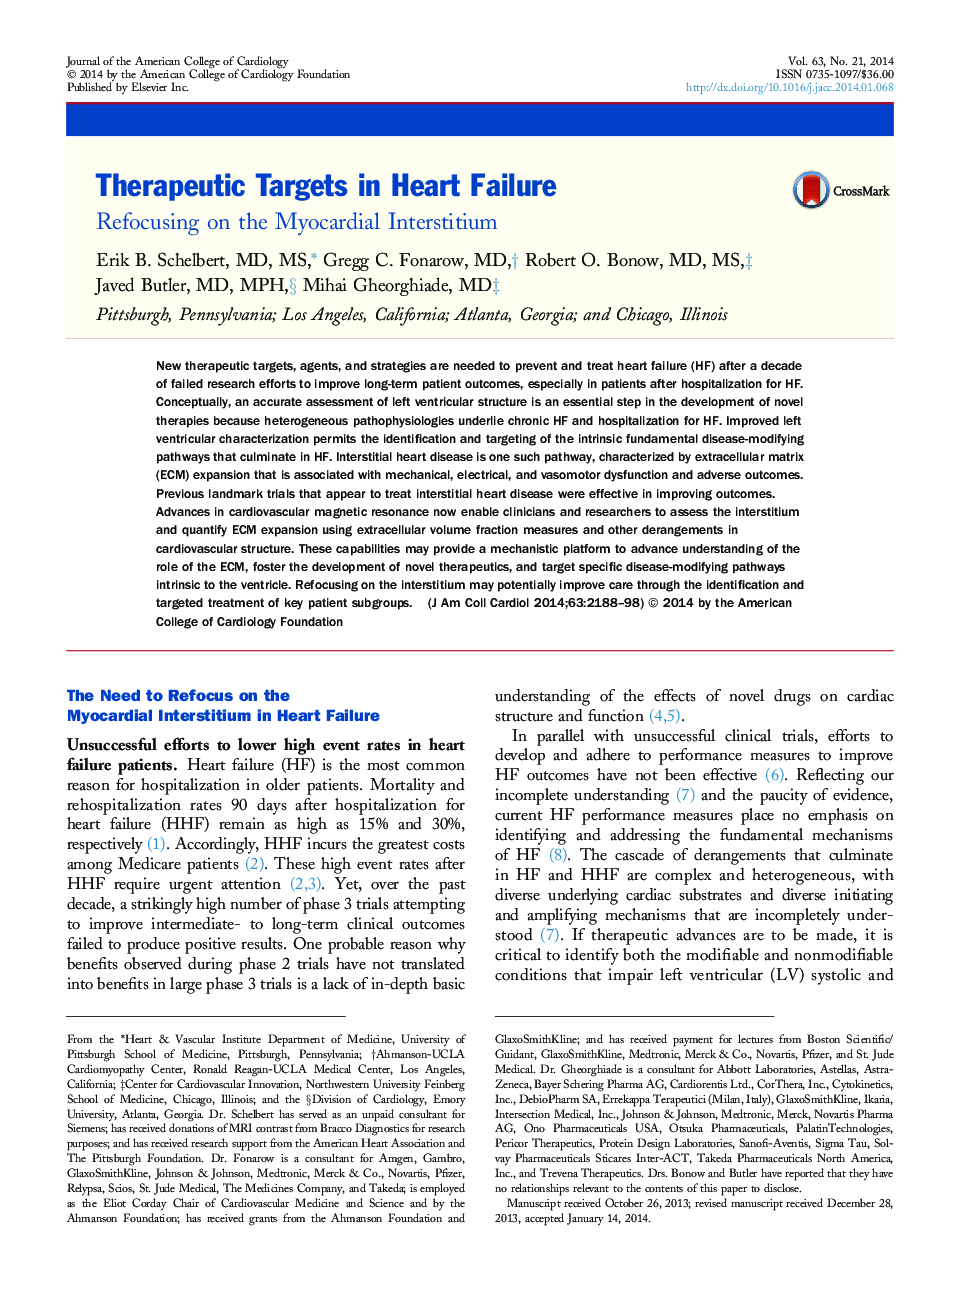 Therapeutic Targets in Heart Failure: Refocusing on the Myocardial Interstitium